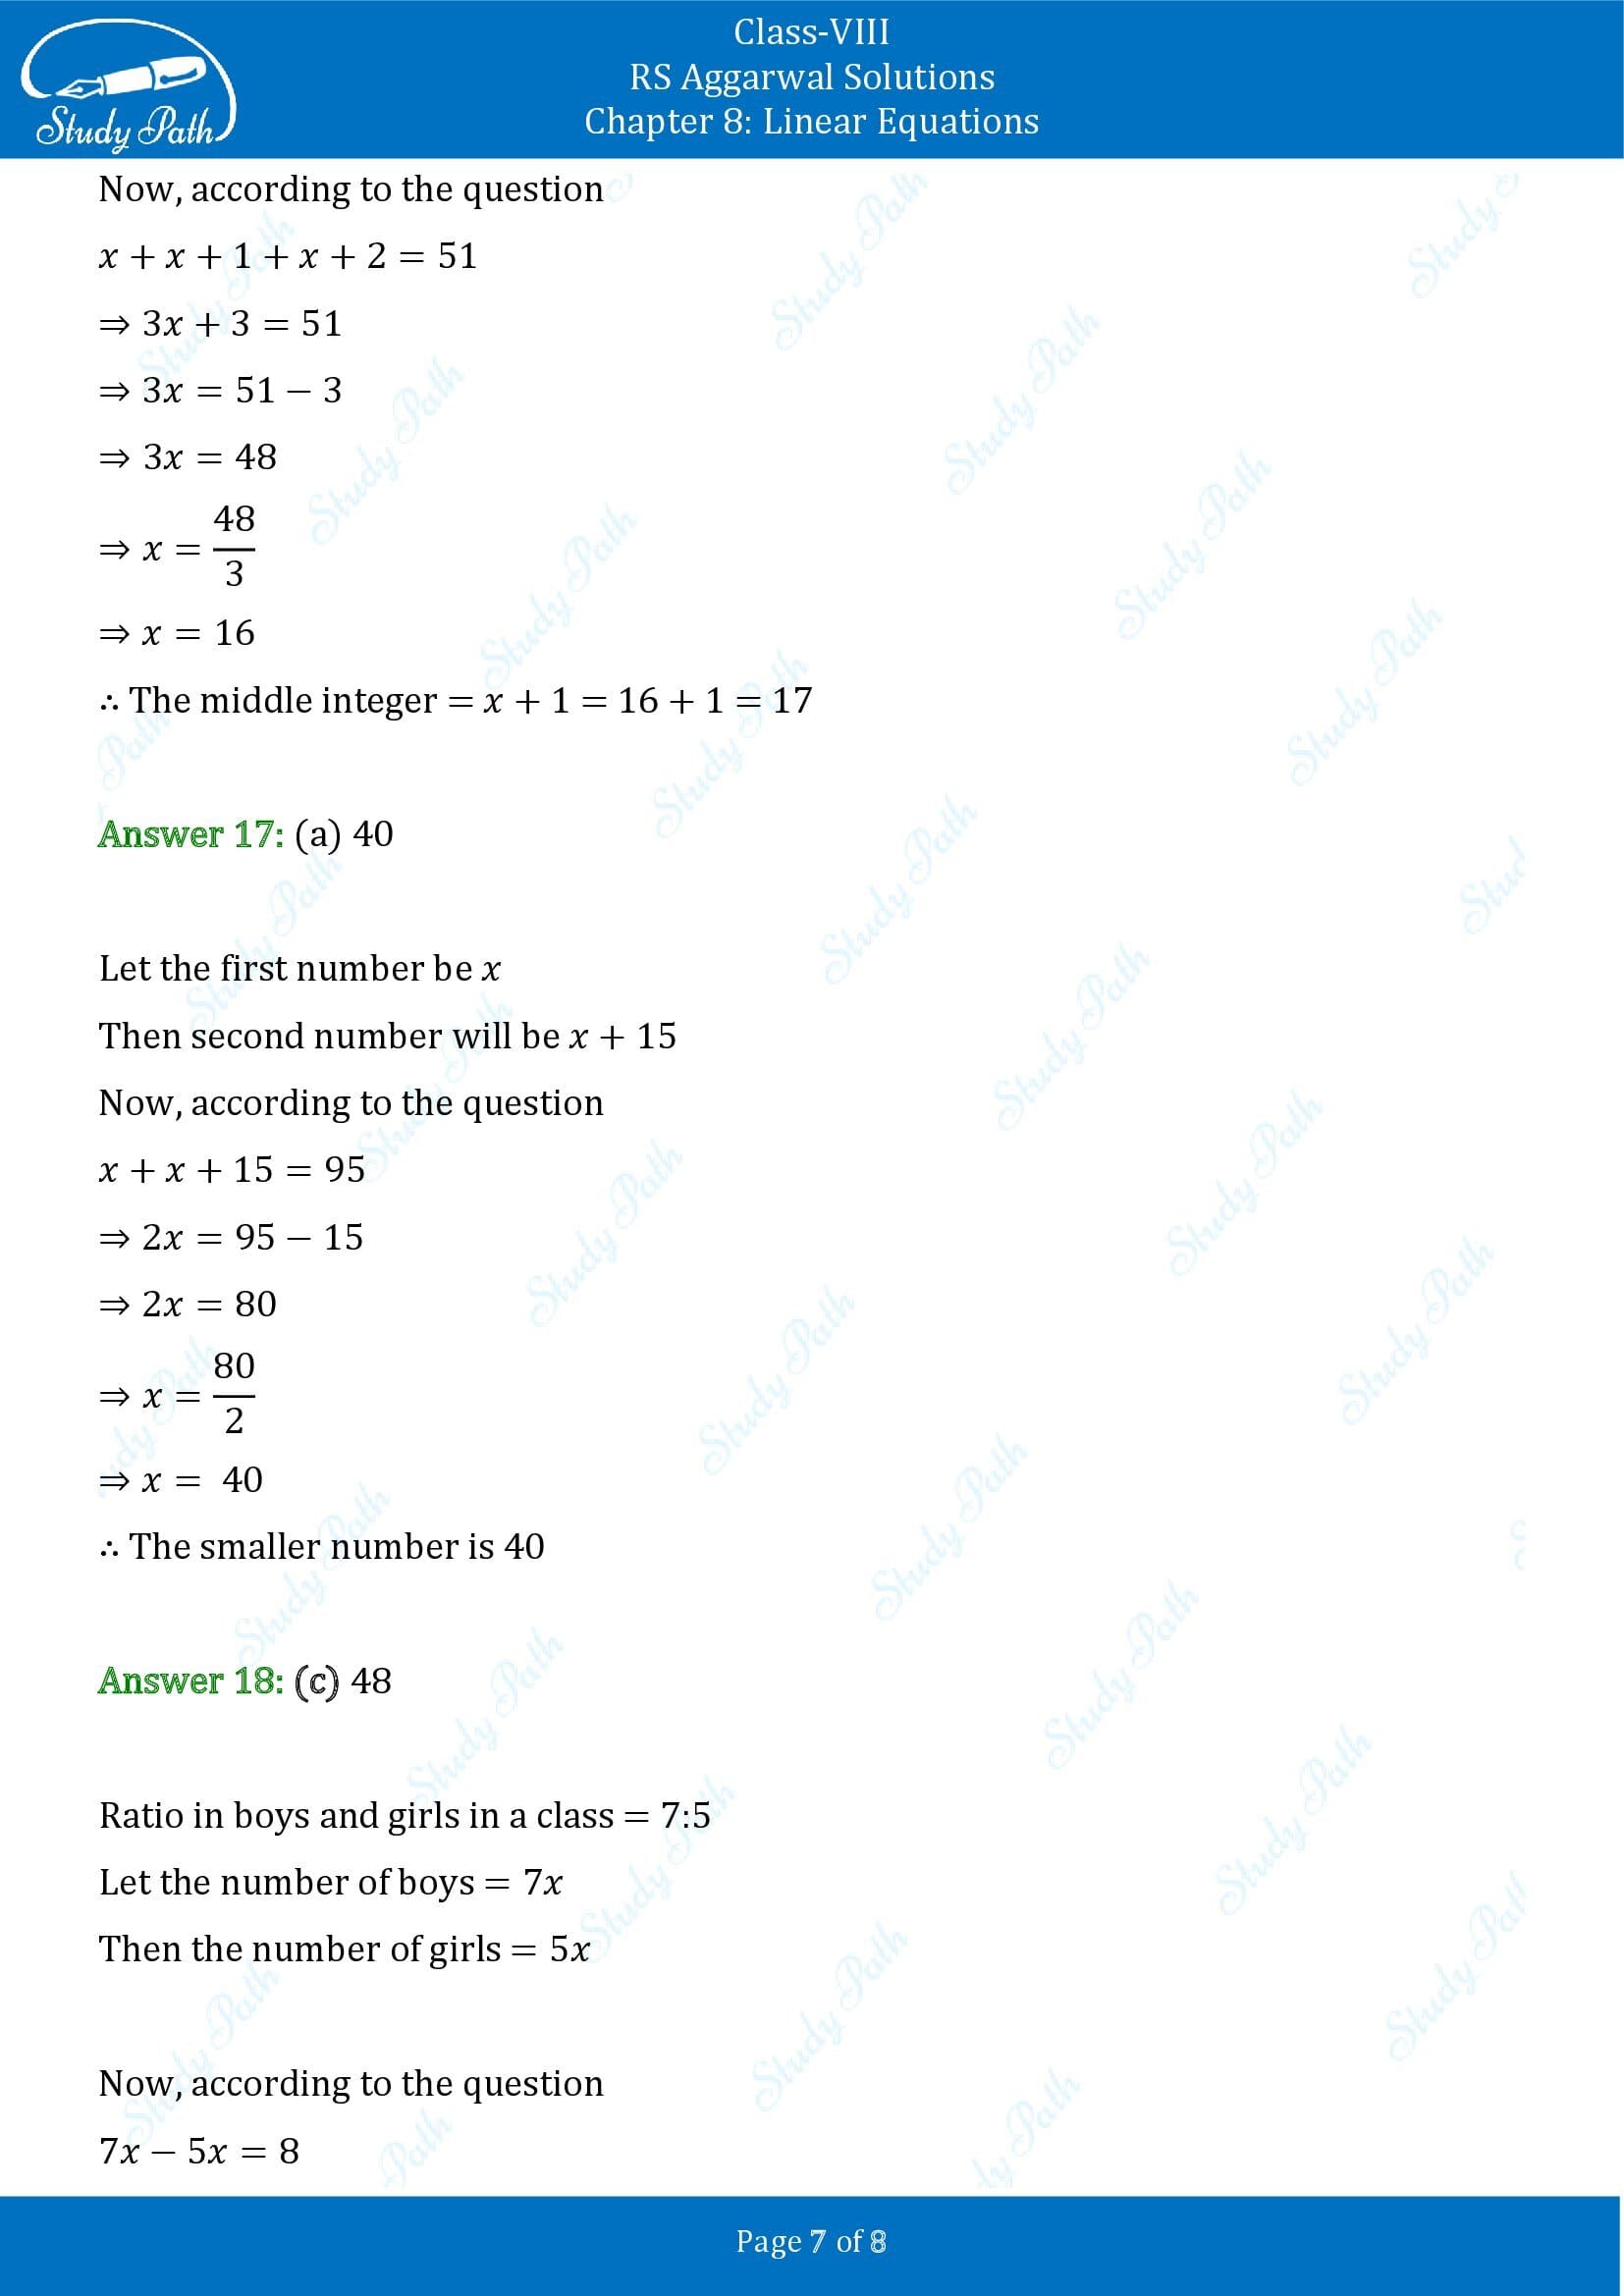 RS Aggarwal Solutions Class 8 Chapter 8 Linear Equations Exercise 8C MCQs 00007